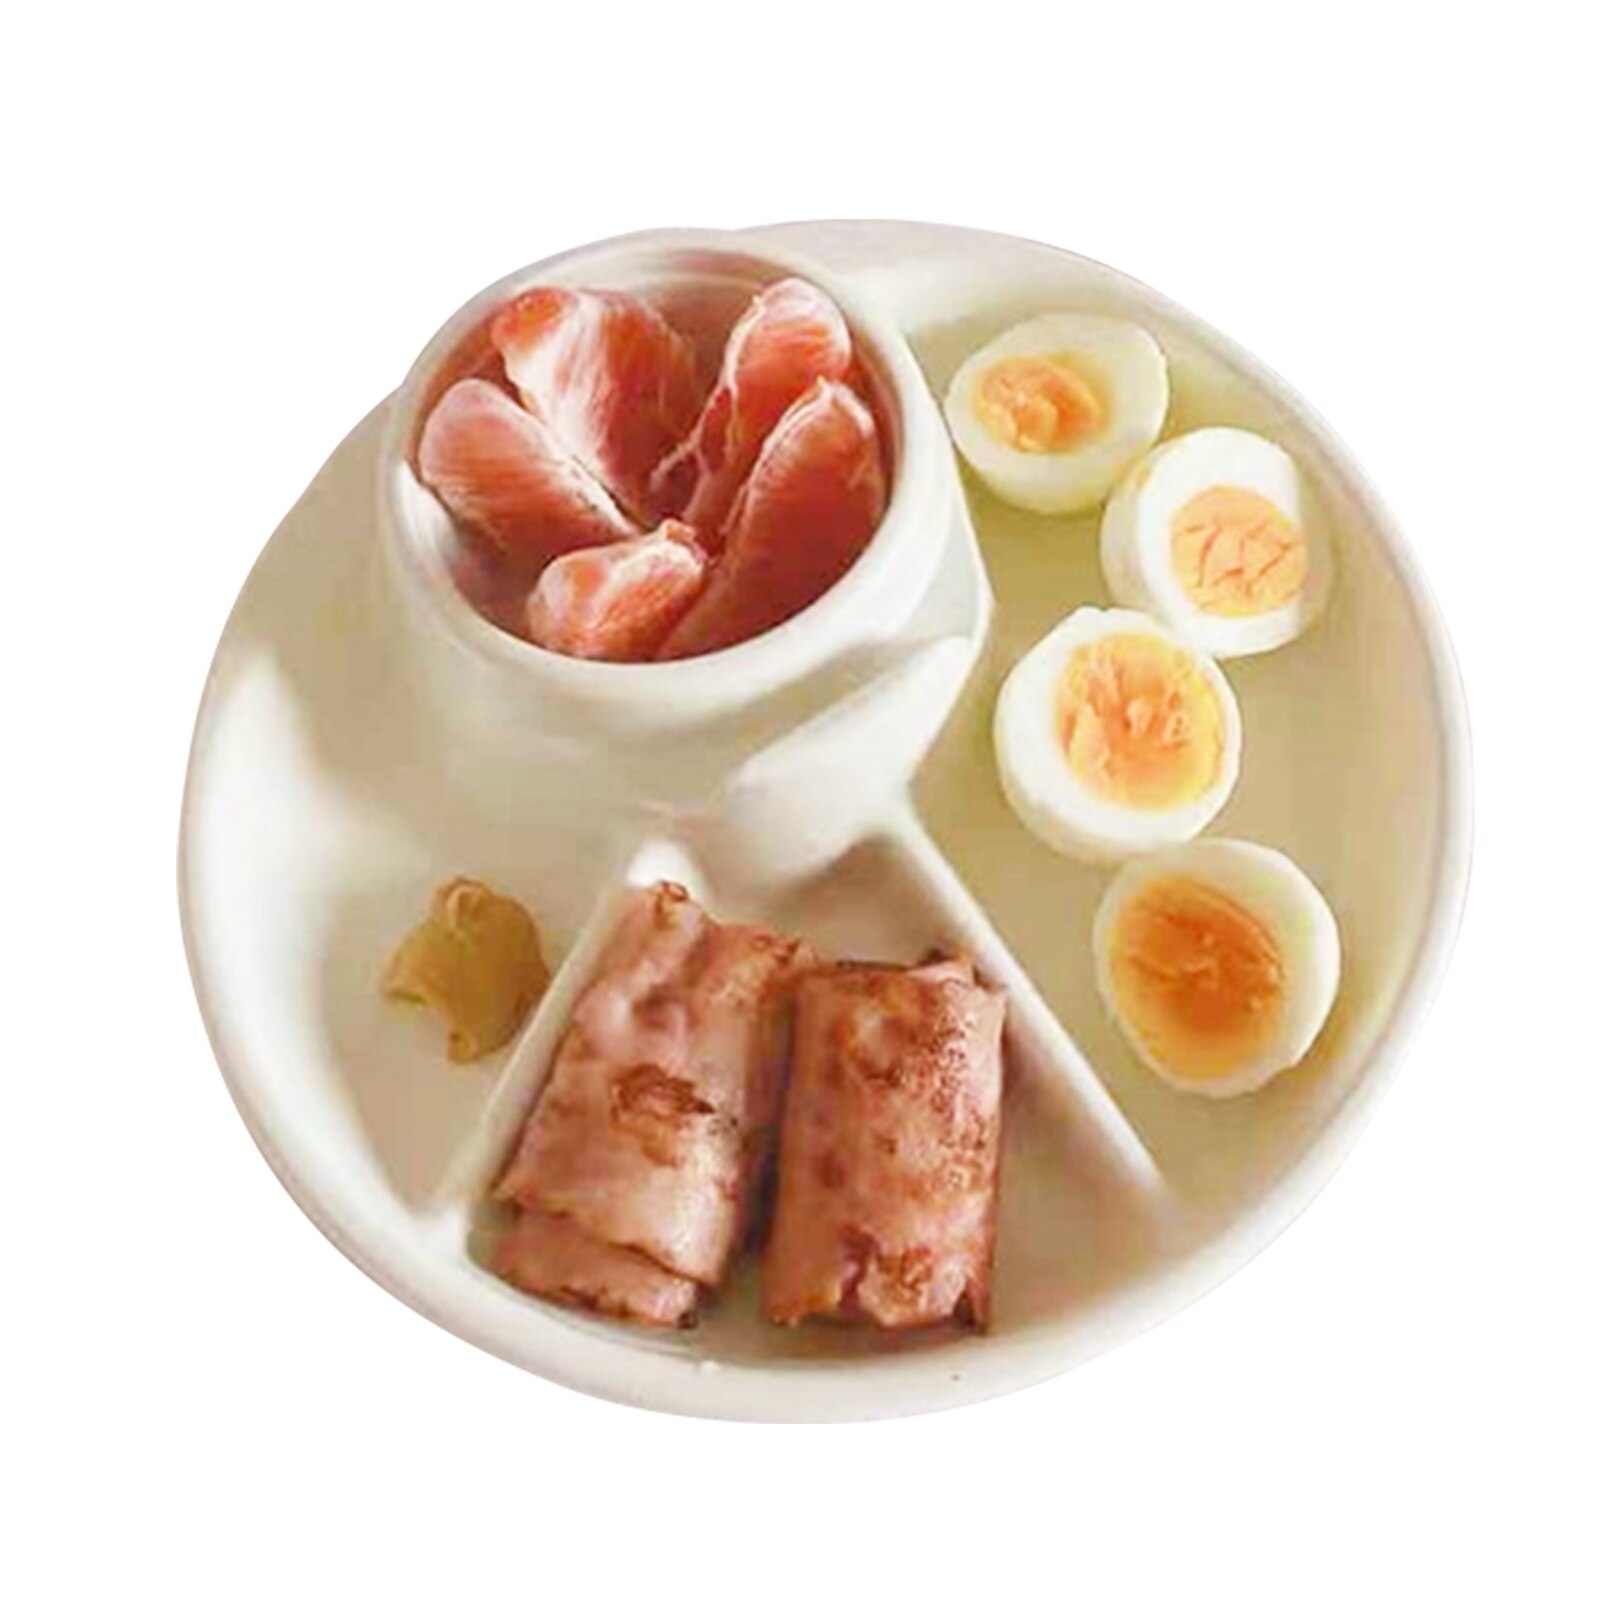 Breakfast Plate Divided Portable Barbecue Picnic T...